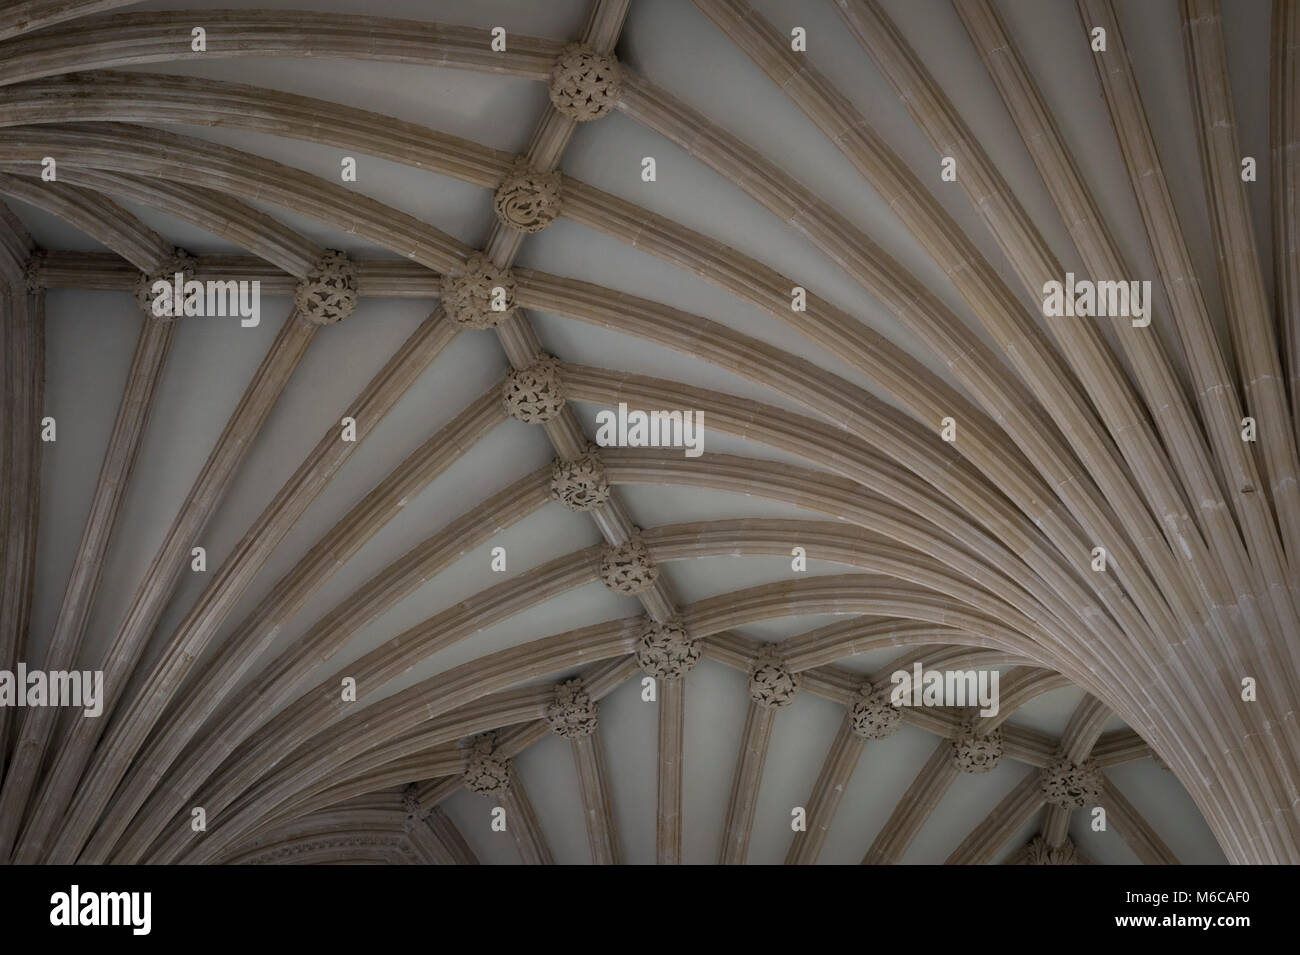 The vaulted ceiling of the Chapterhouse in Wells Cathedral, Wells, Somerset, UK. Stock Photo